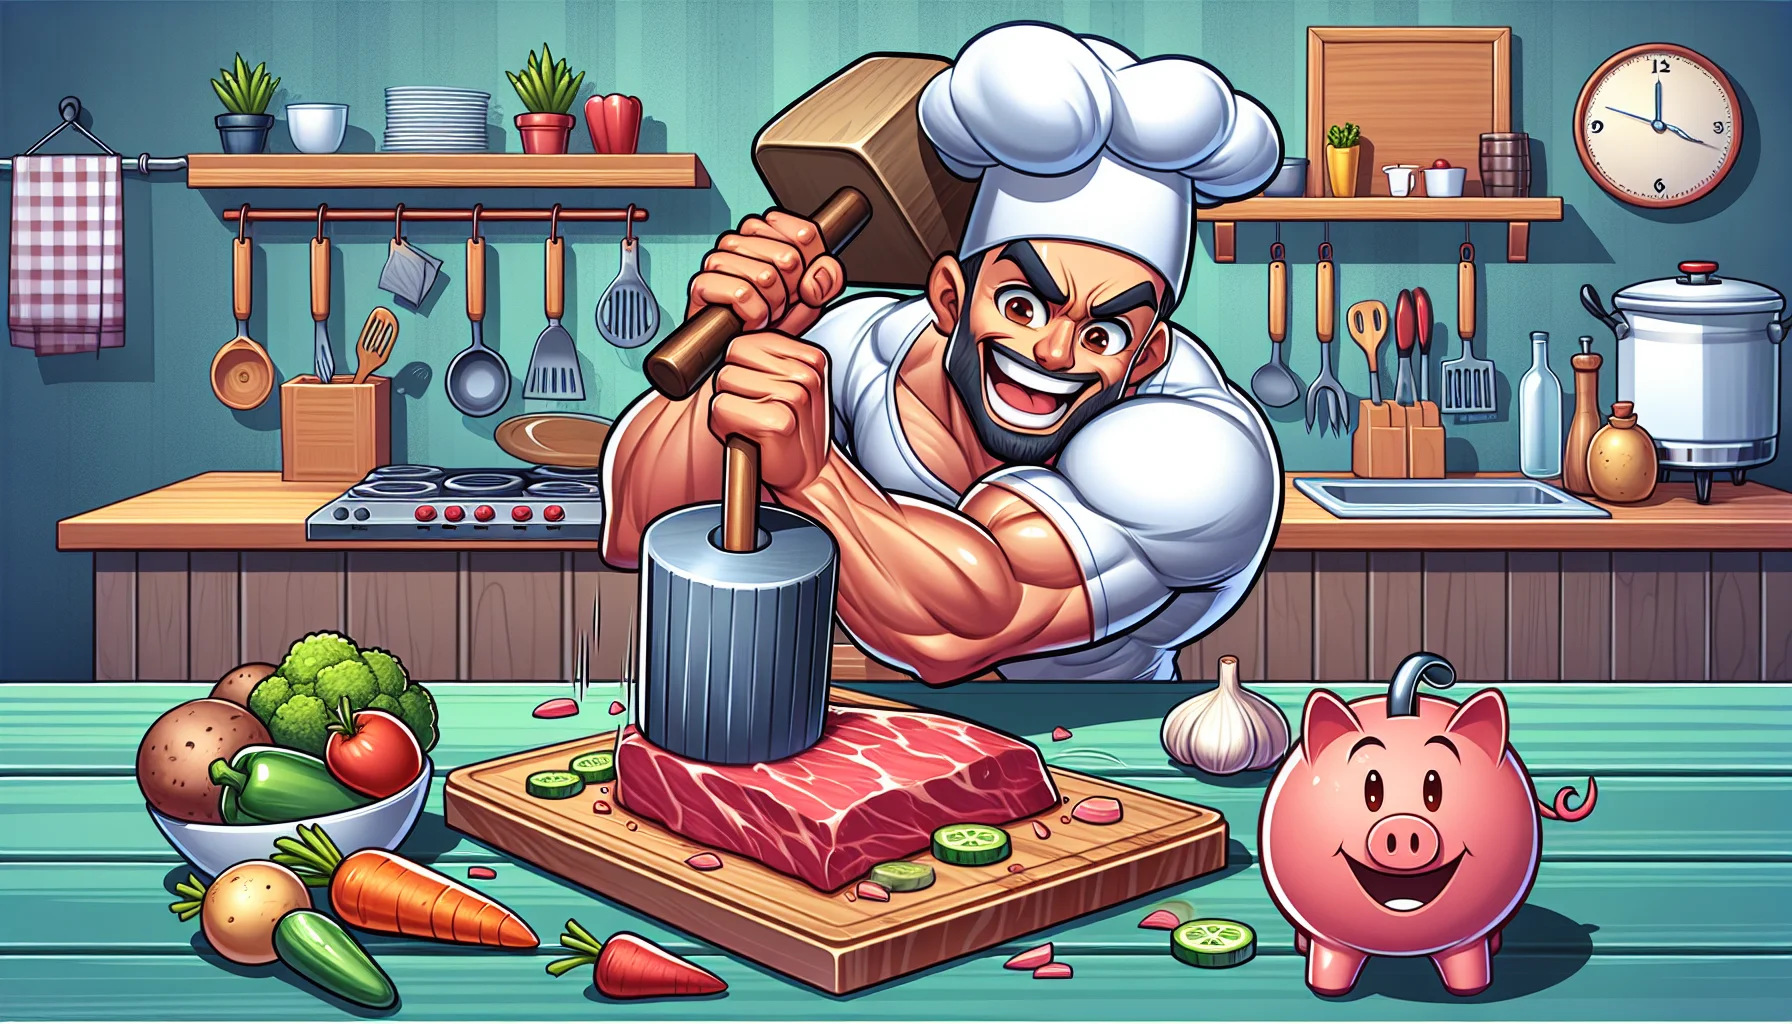 Create an amusing yet educational scene illustrating the process of tenderizing beef stew meat as a way to promote cost-effective, healthy eating habits. Set in a cartoon style kitchen with colorful utensils, depict a character with a comic face. This character, an athletic, Middle-Eastern male, is using a large tenderizing mallet to gently pound a piece of lean, succulent beef for a stew on a wooden cutting board. To emphasize the health aspect, illustrate vibrant, fresh vegetables like carrots and potatoes around, waiting to be added to the stew. Next to him, add a piggy bank with a happy face, symbolizing savings from cooking at home.